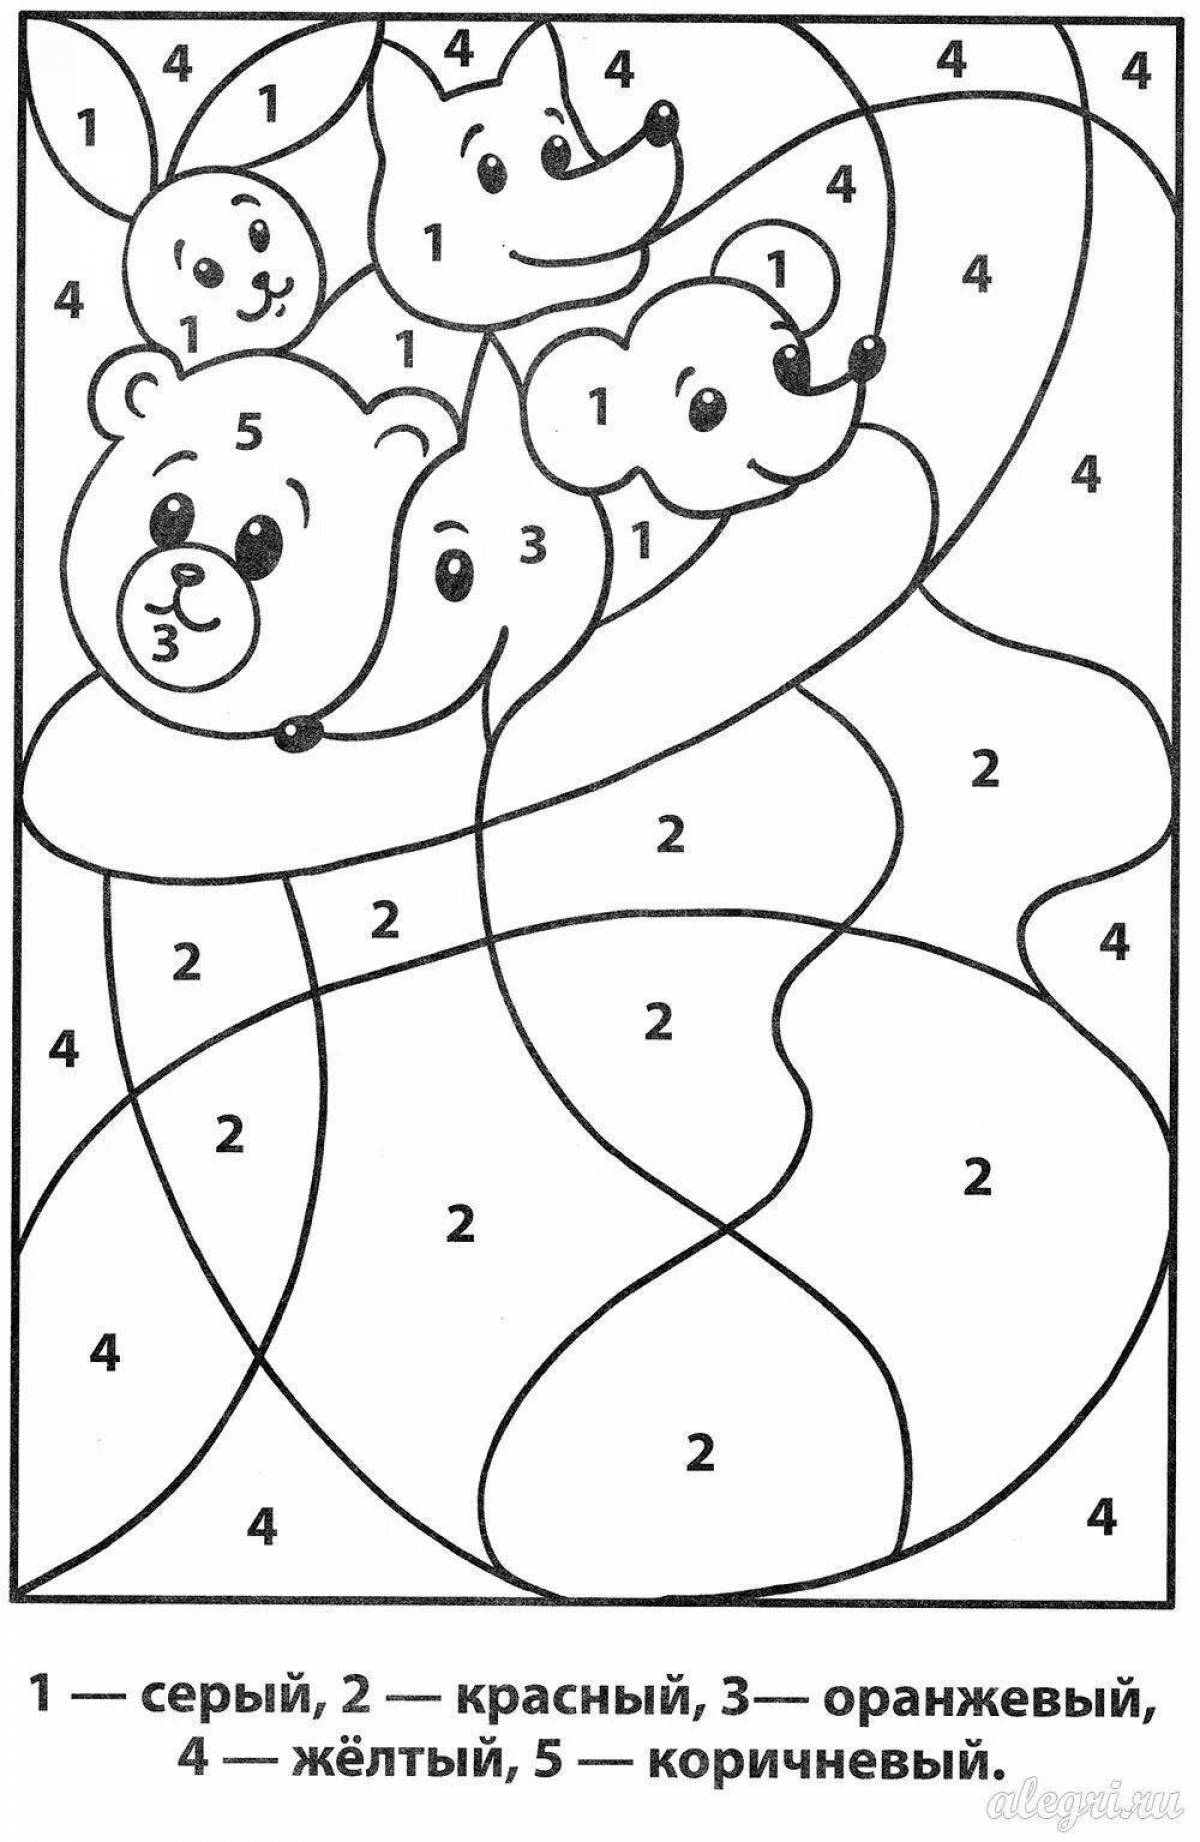 By numbers for children 4 years old #4